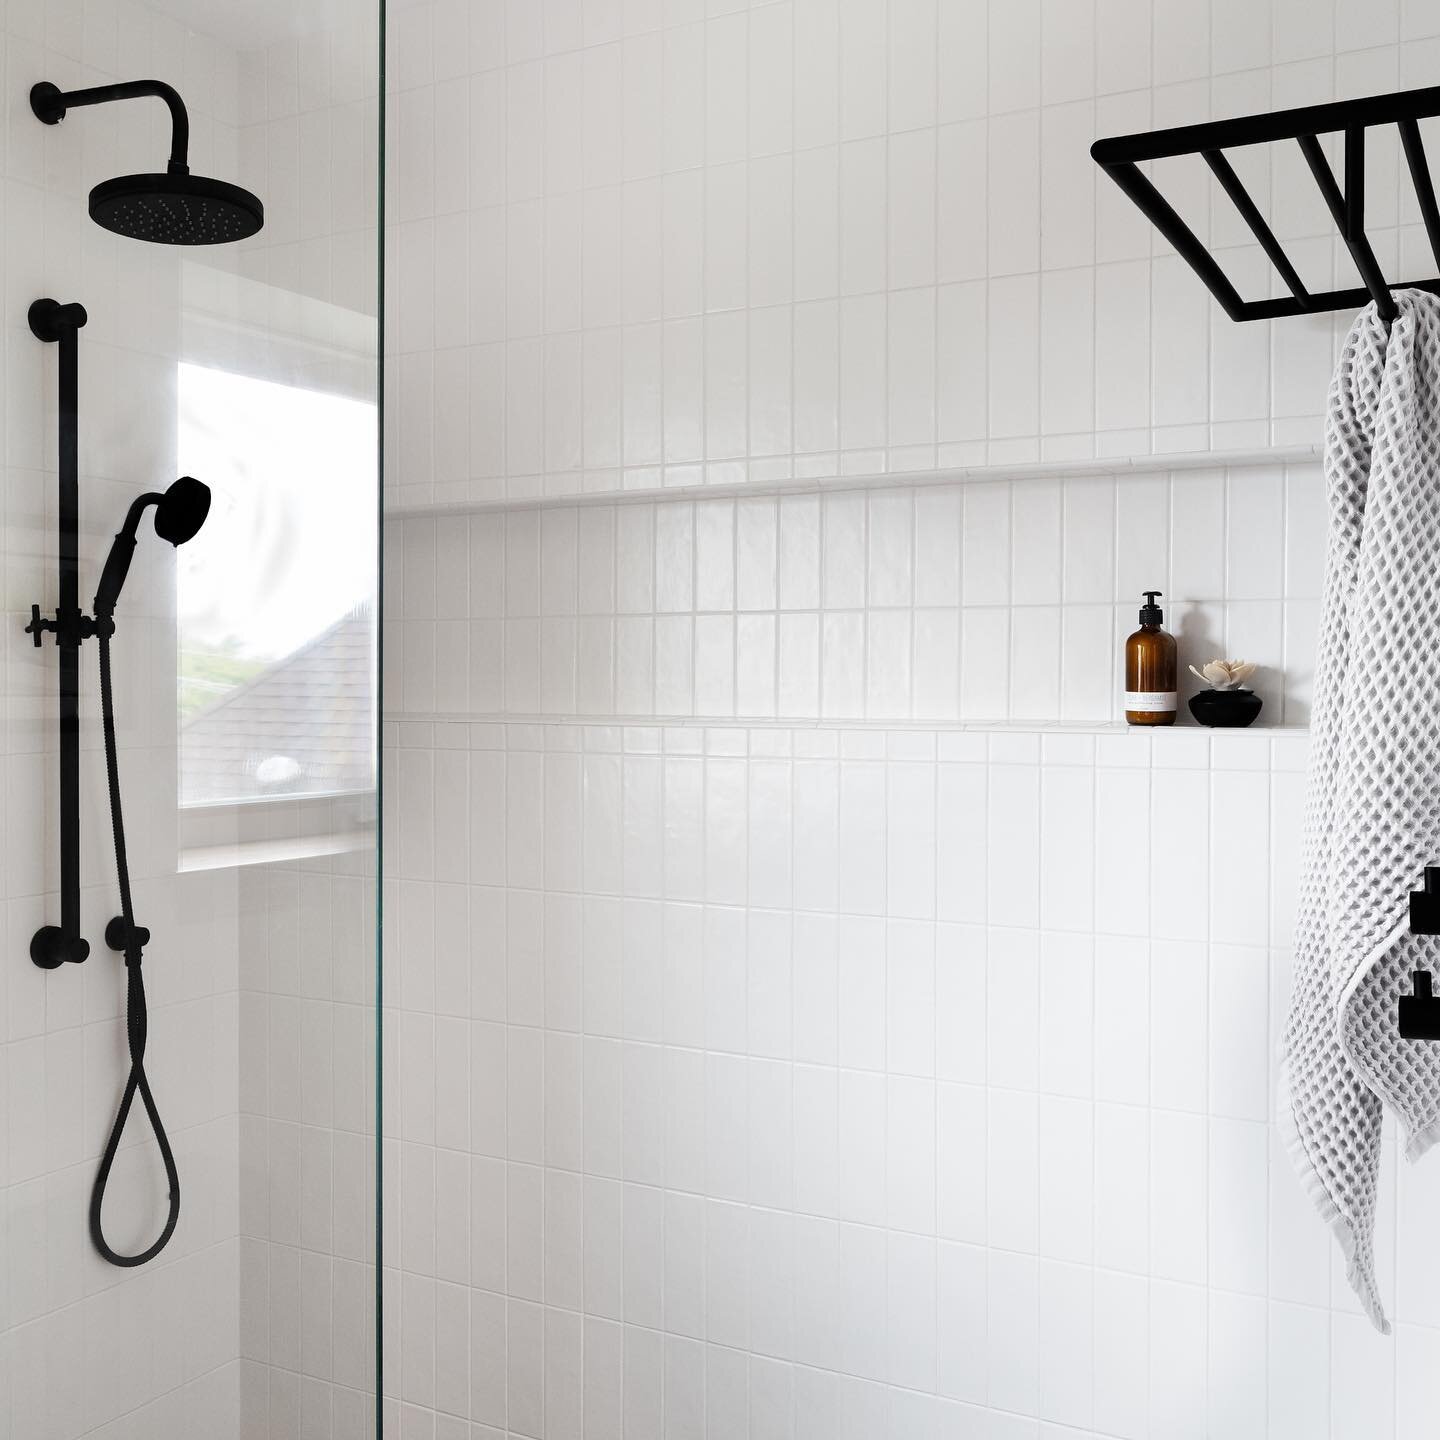 Unless I&rsquo;m working on a project with full permission to get really playful with color, I like the appeal of a really crisp shower interior. In this case, the simple white tile pairs perfectly with the black fixtures to create an inviting, clean